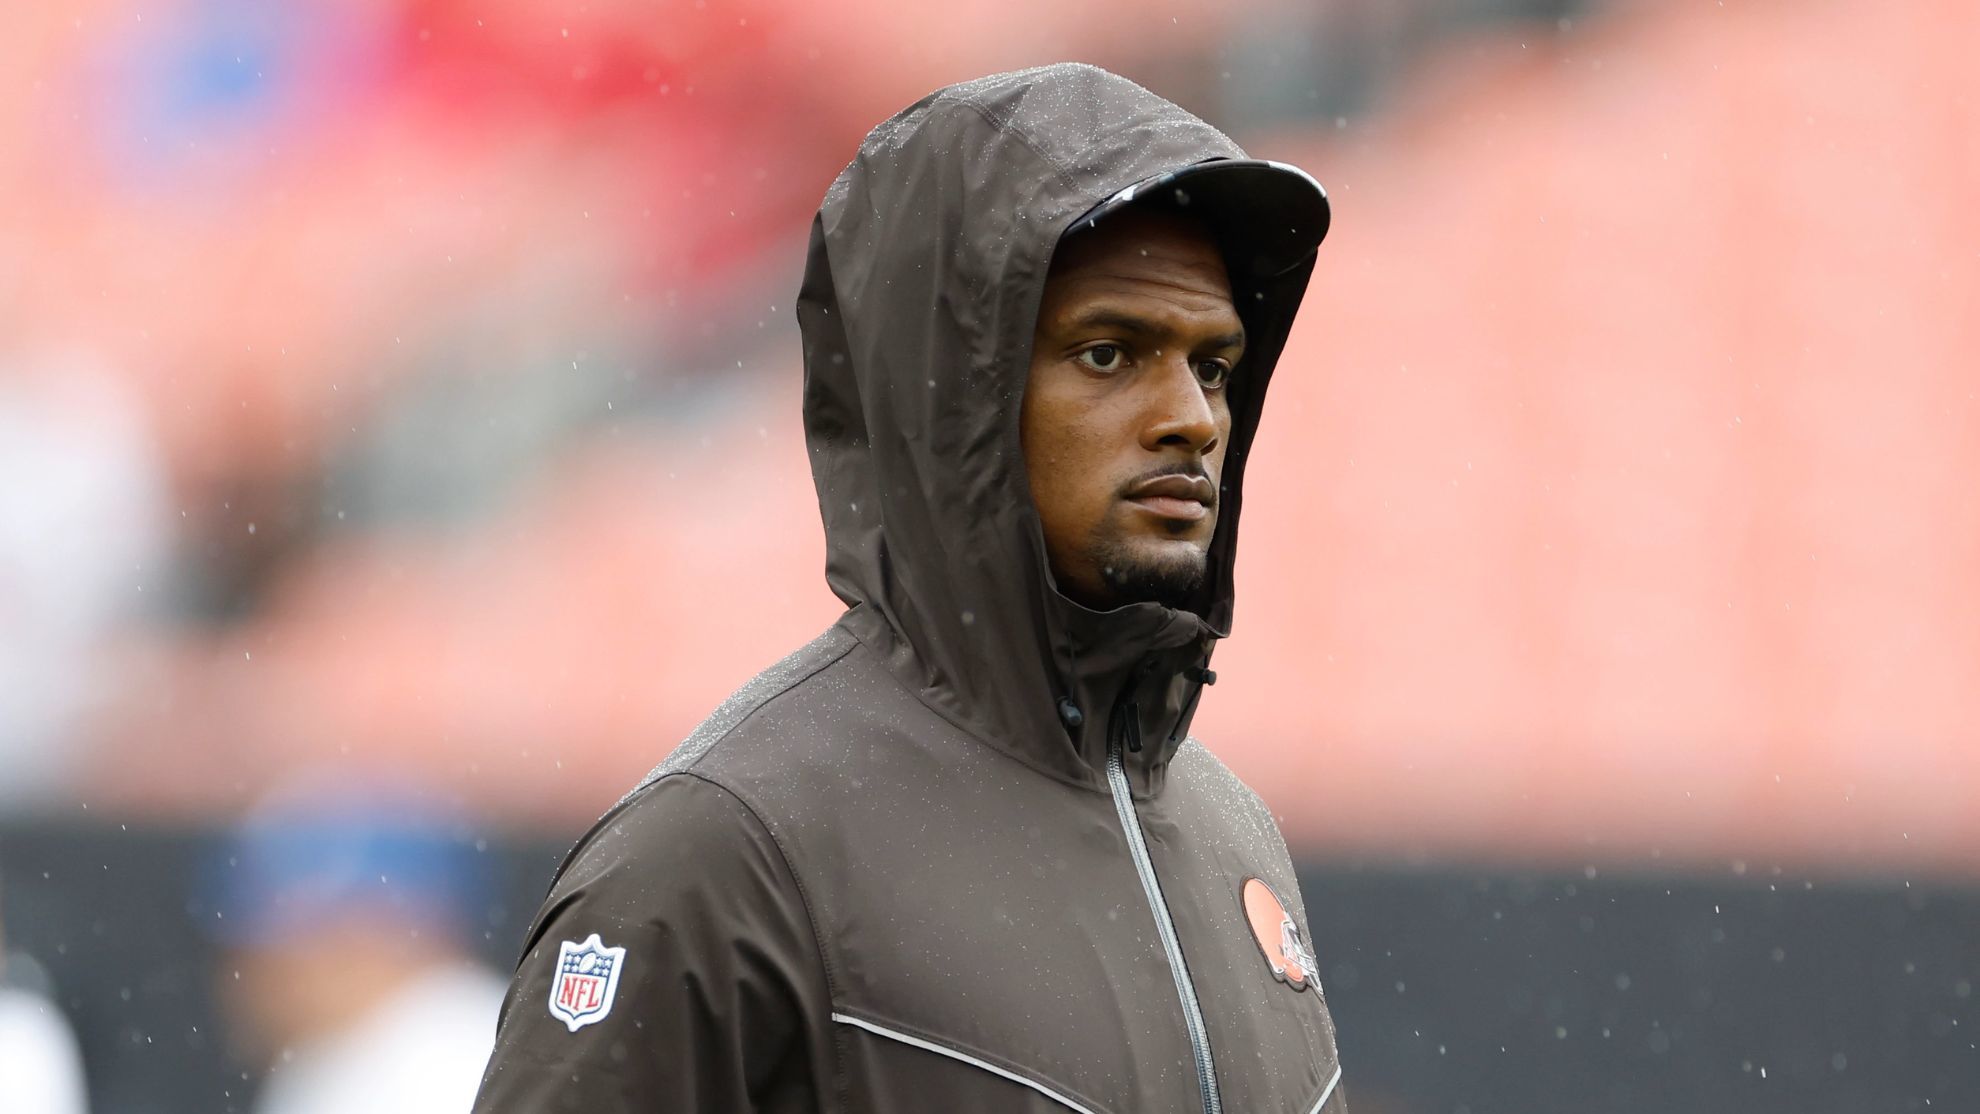 DeShaun Watson looks on from the sideline with the Cleveland Browns. - AP